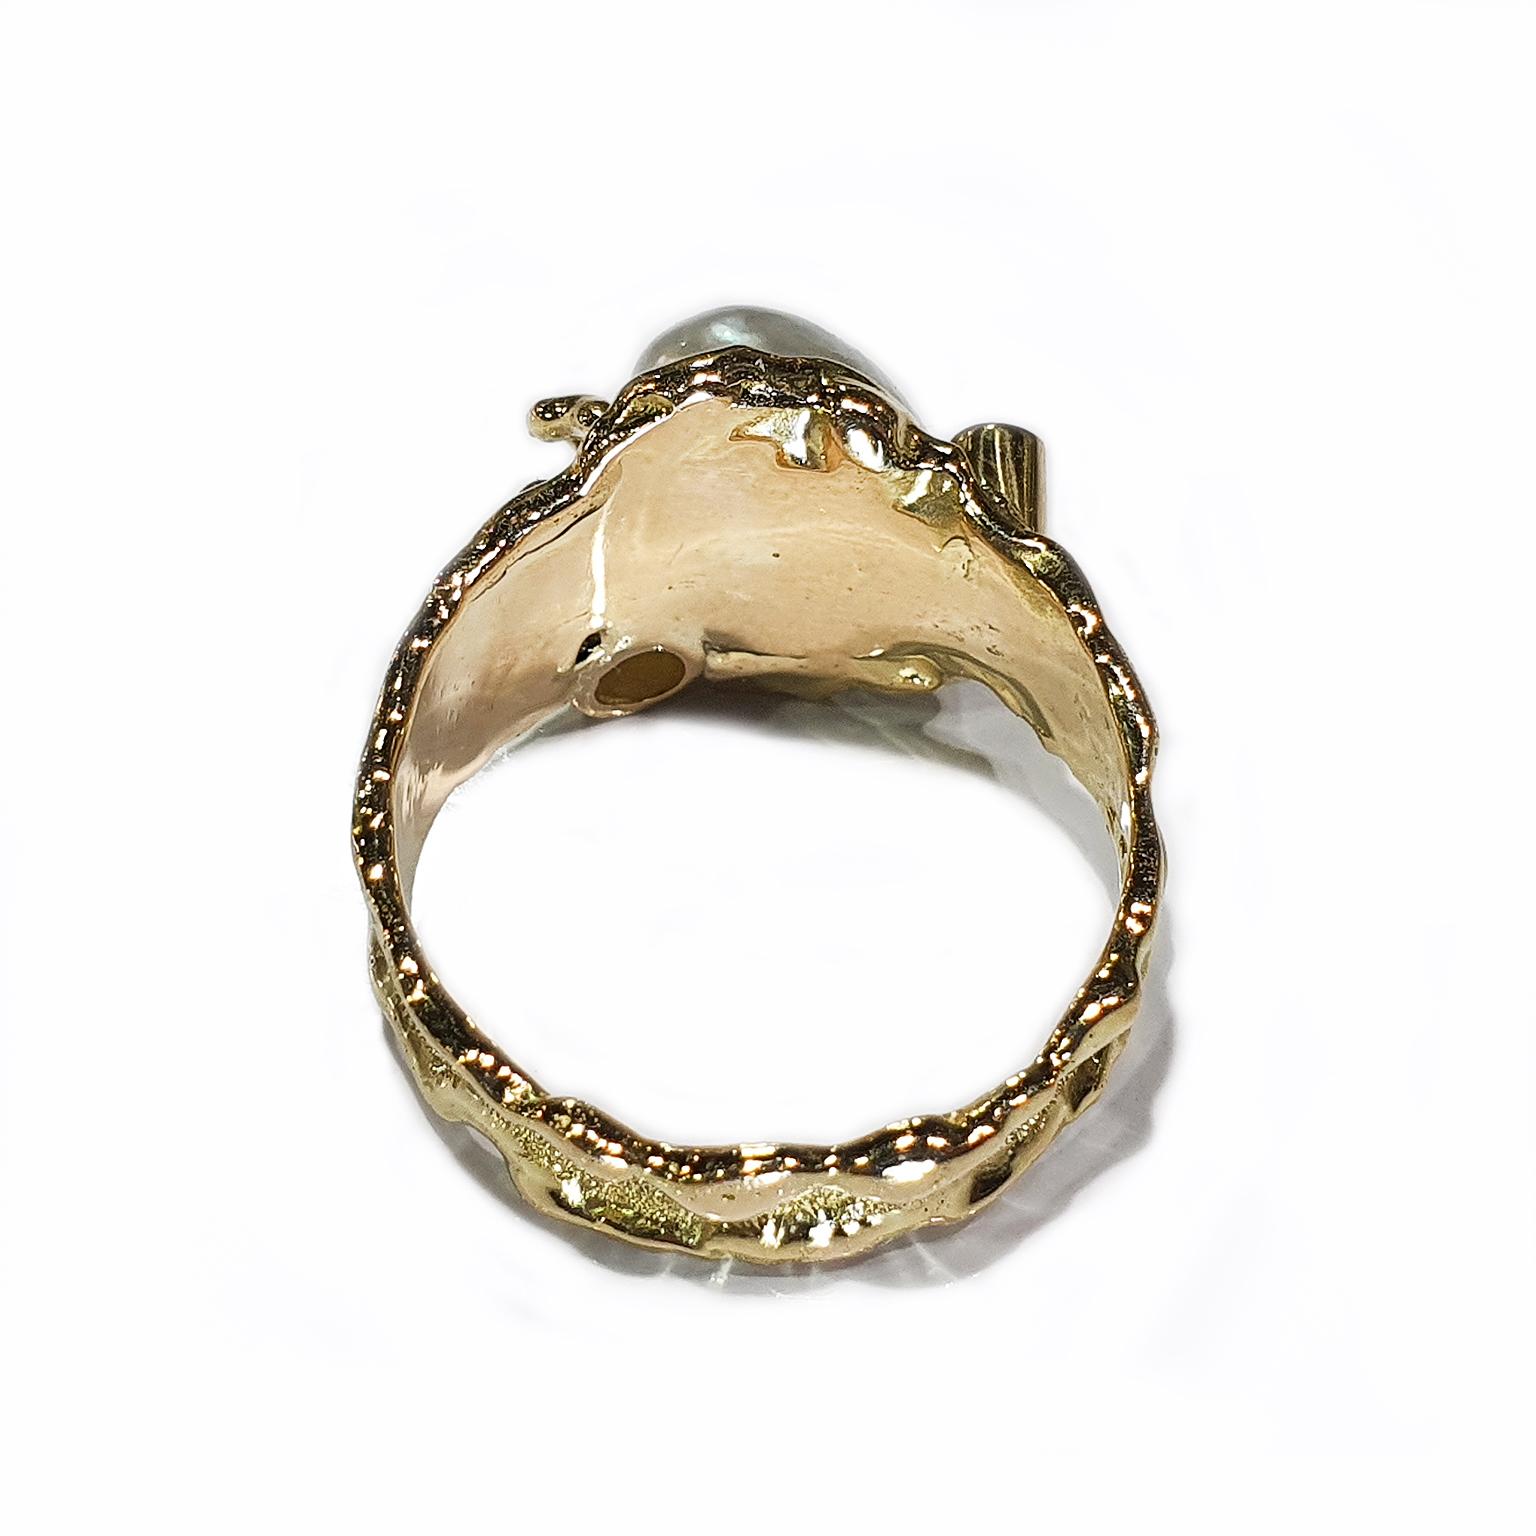 Paul Amey Signature Molten Edge, 18k Gold, Blue Enamel, Pearl and Diamond Ring In New Condition For Sale In Tewantin, Queensland